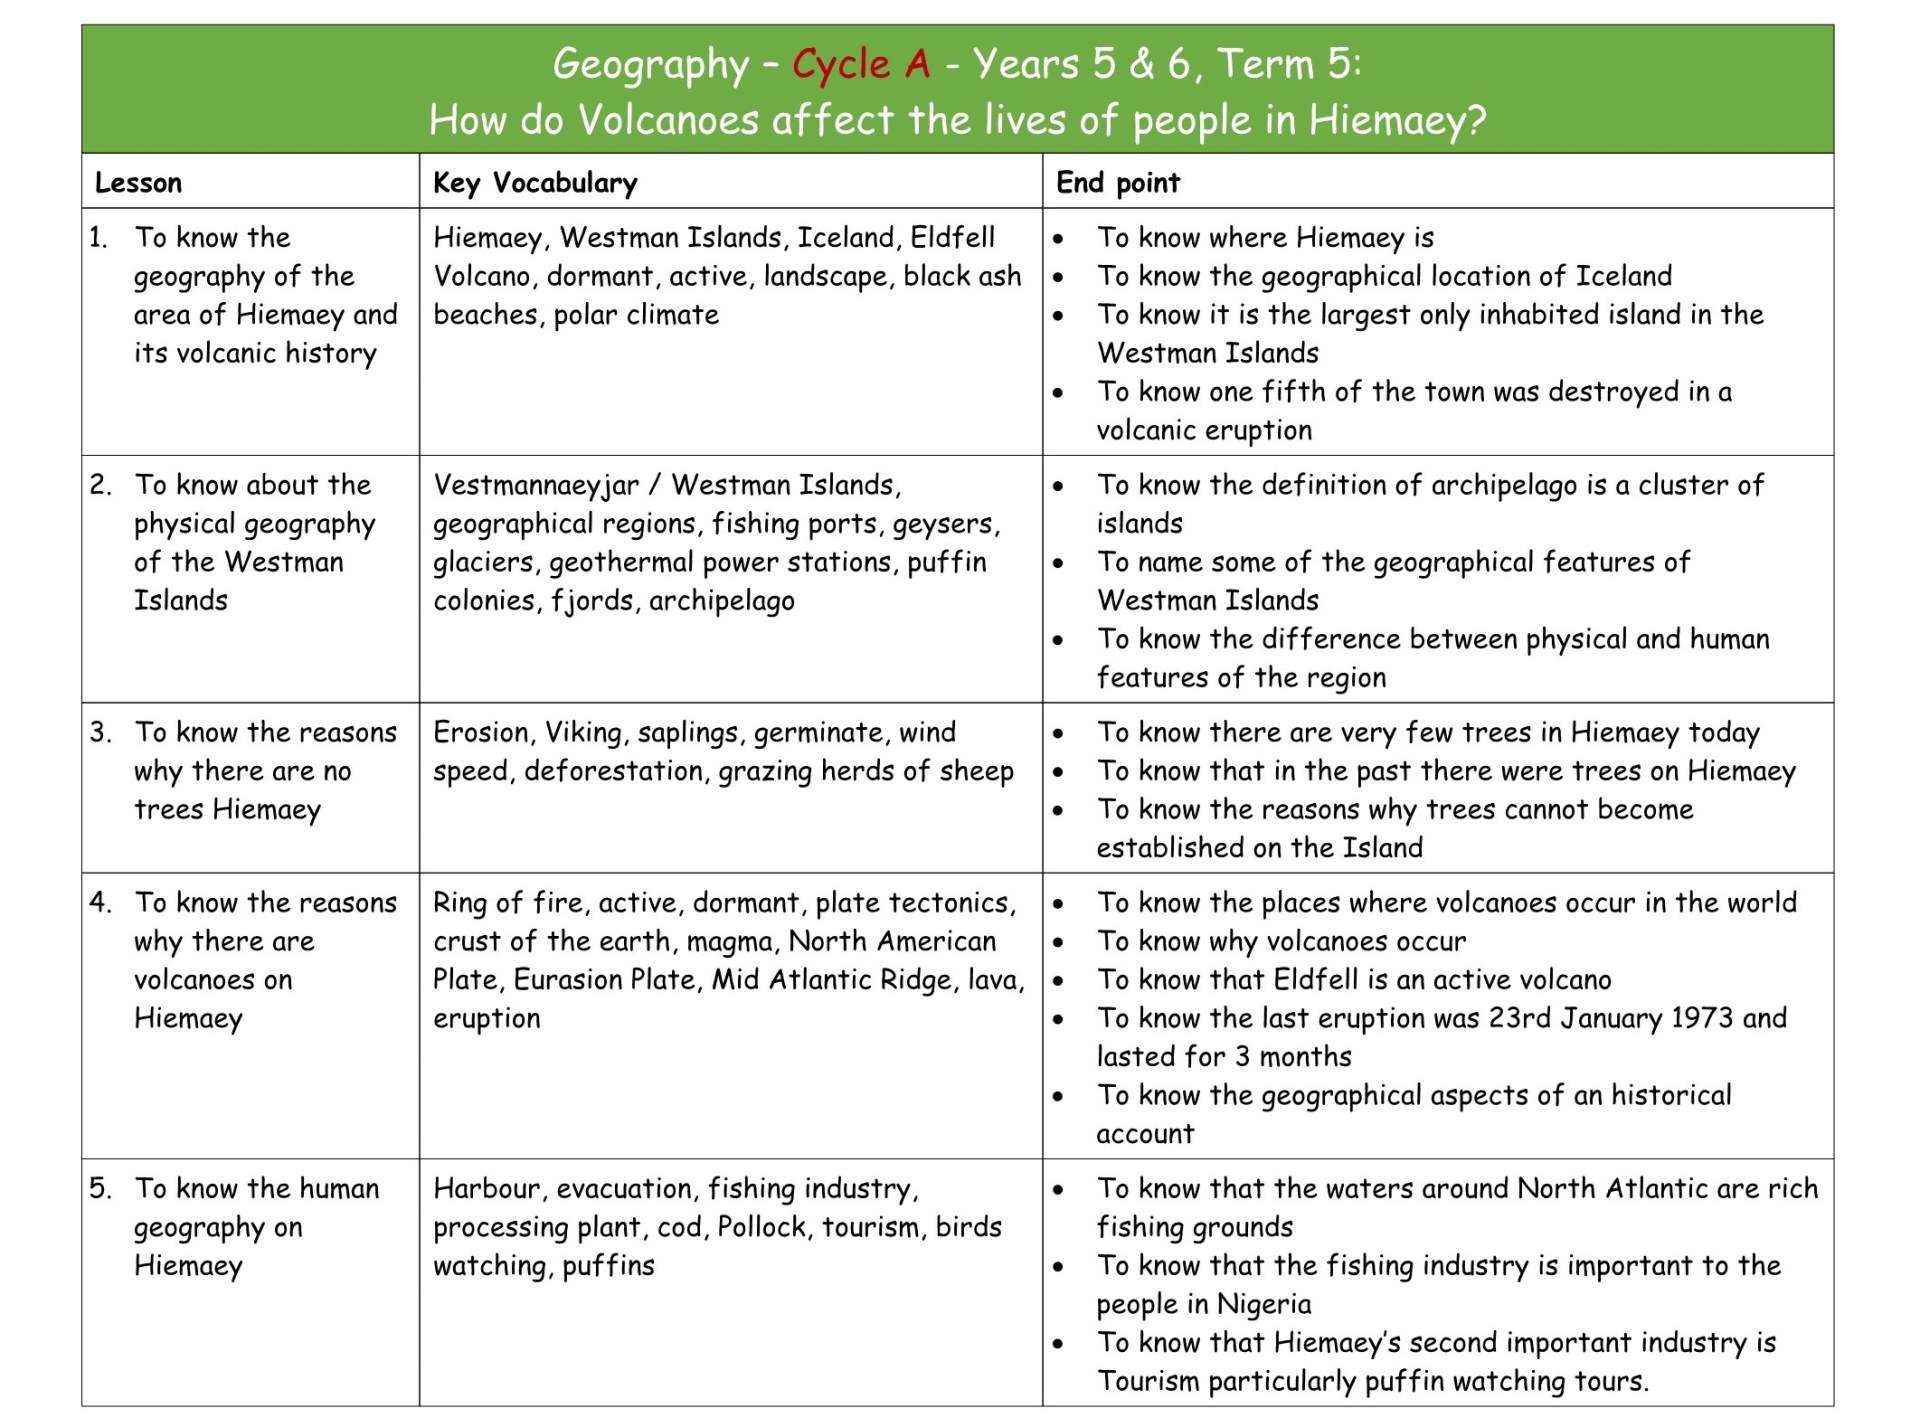 Geography Y3&4 Cycle A MTP T5